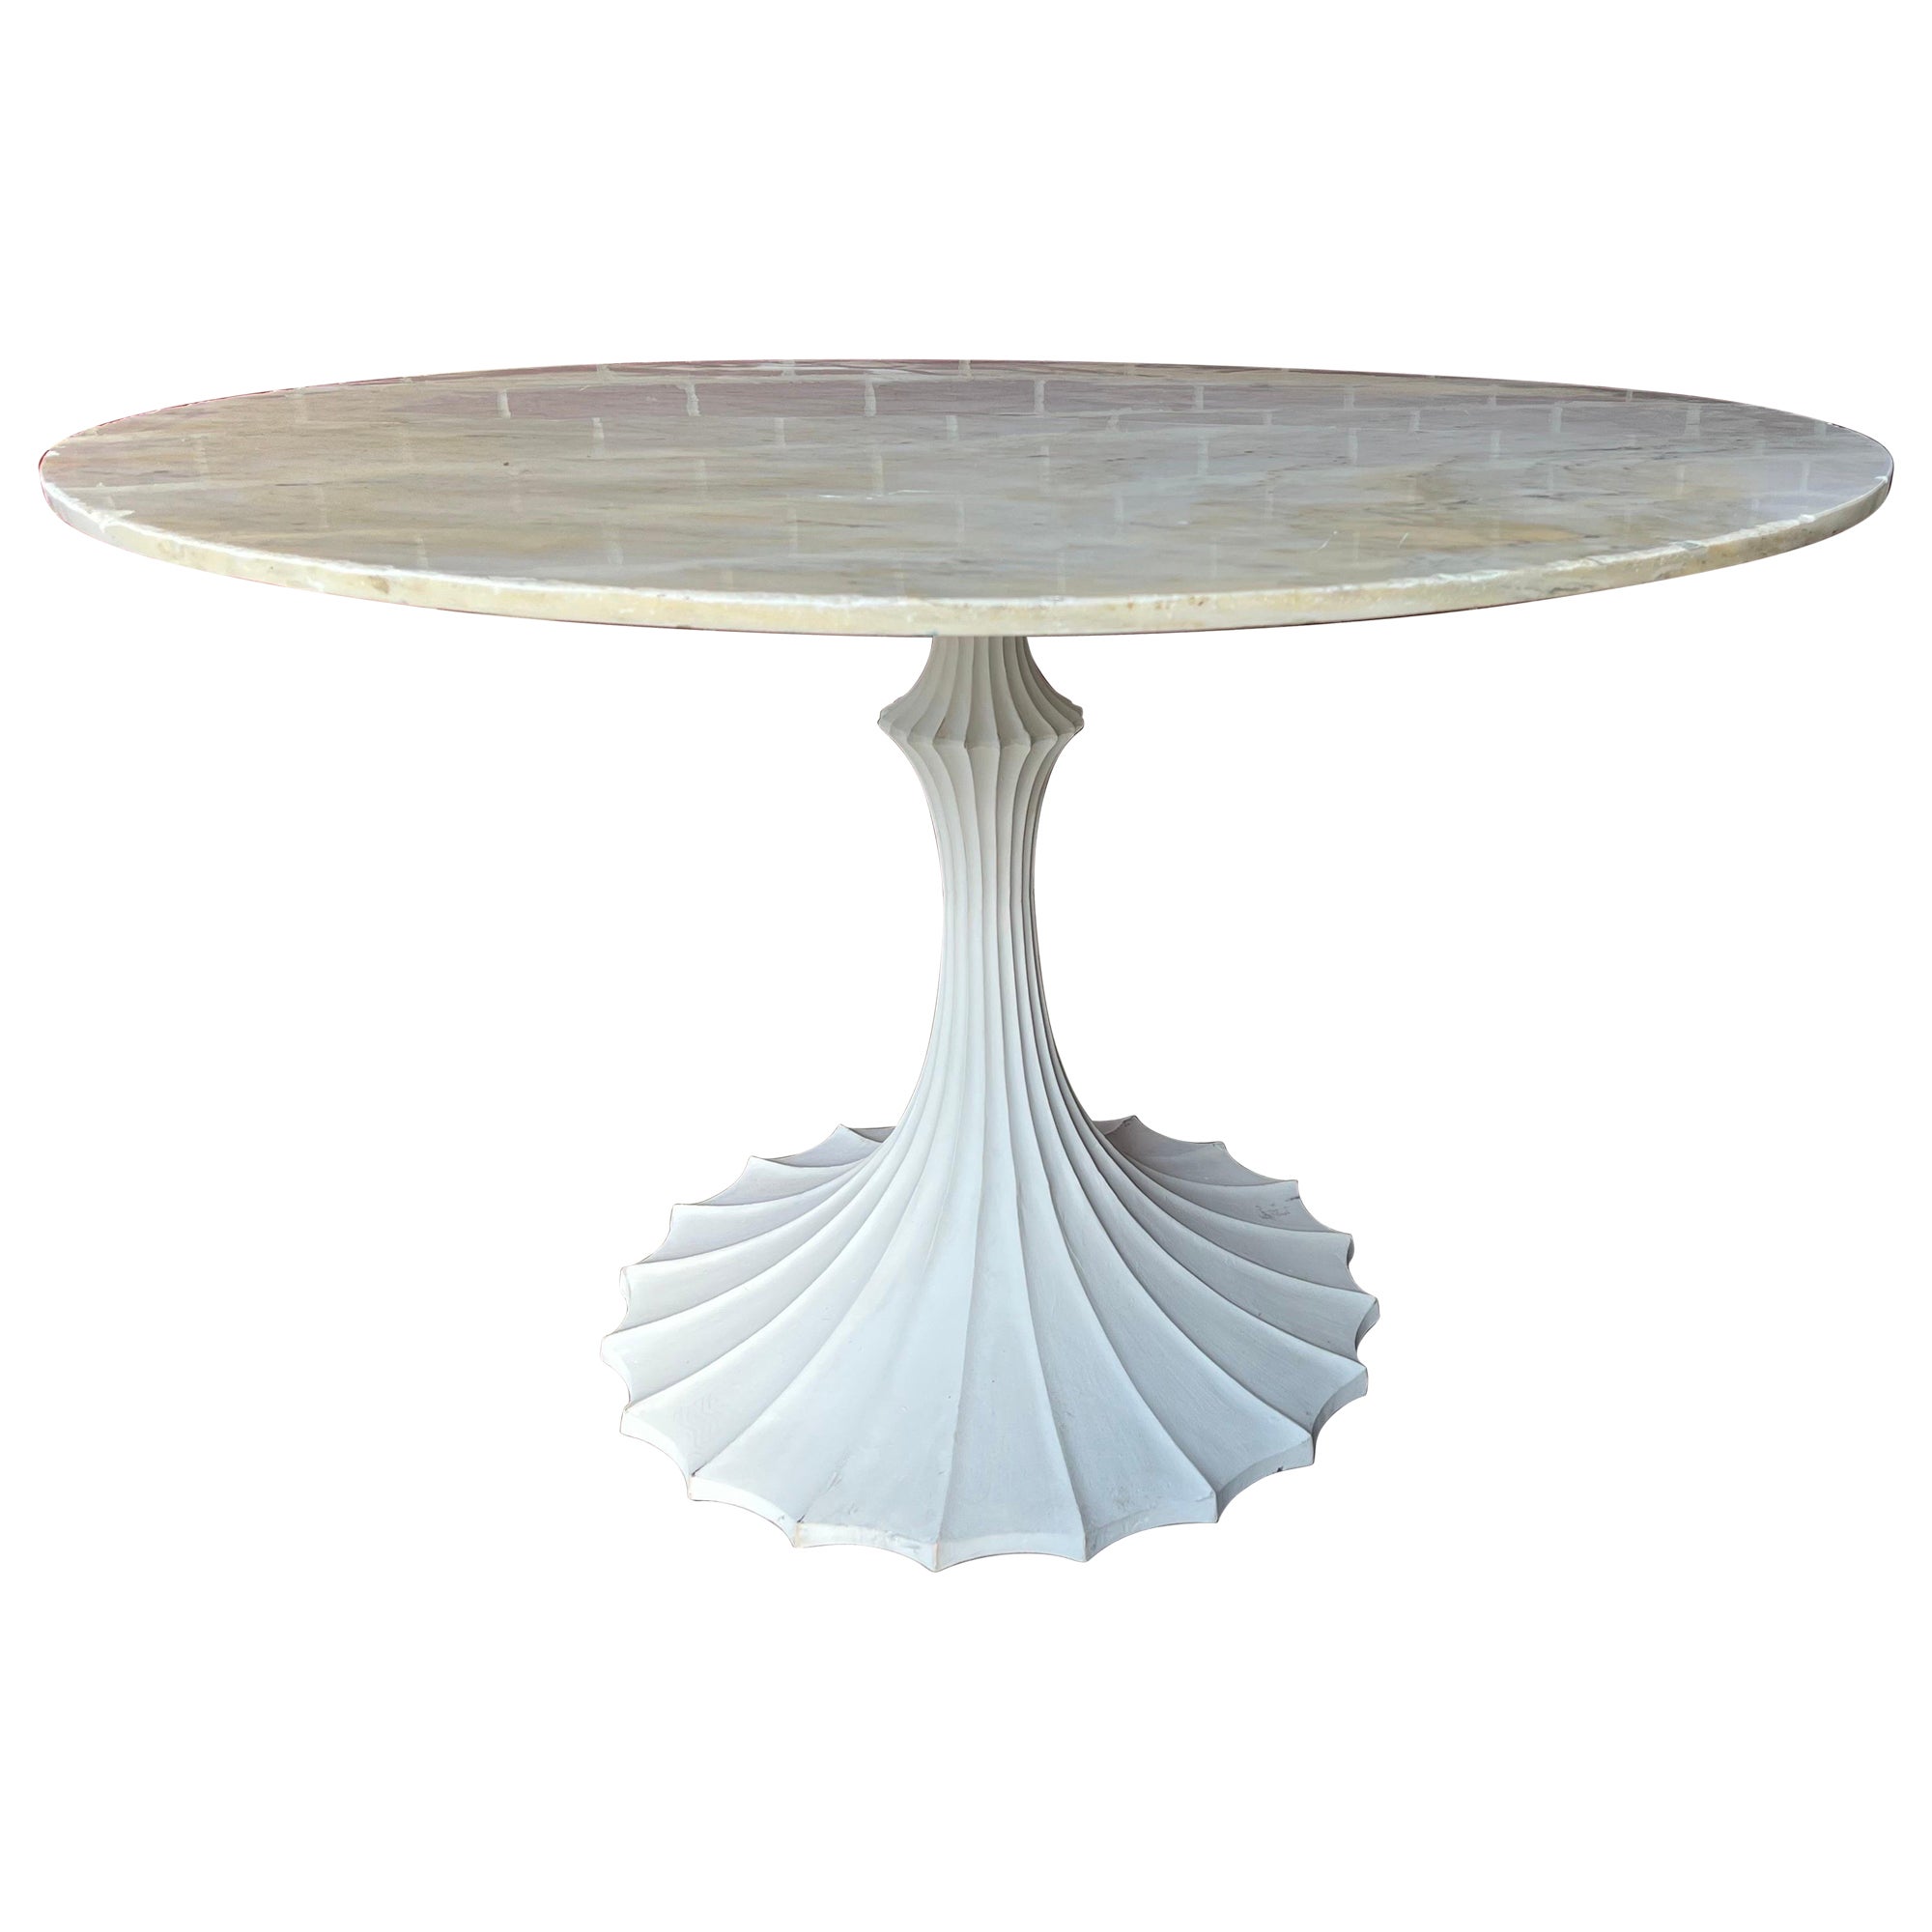 William D Scott Fluted Iron Tulip Table Base (Only)  - White For Sale